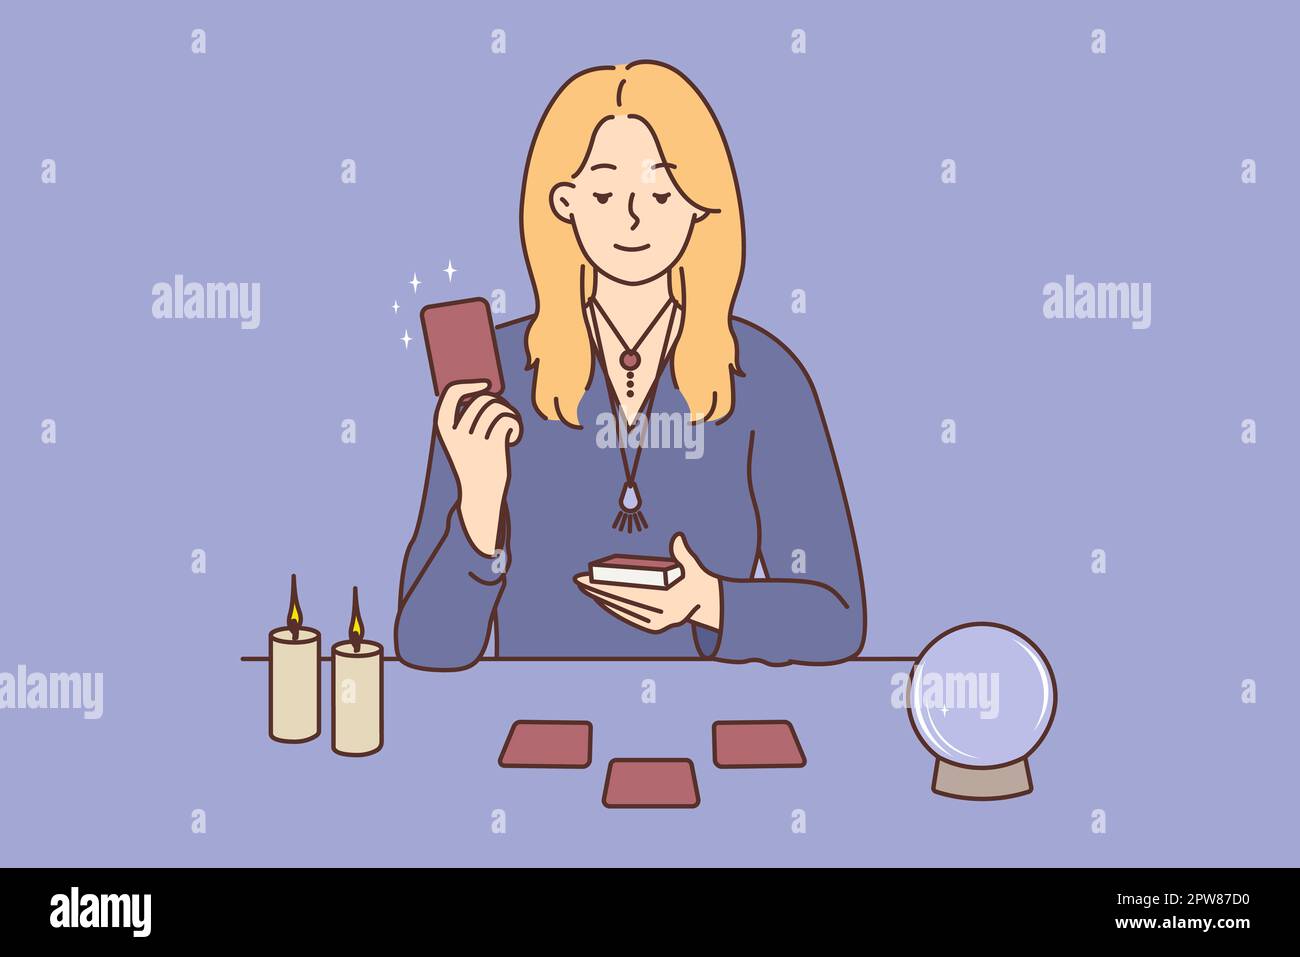 Young woman with cards telling fortune sitting on table in studio. Female magician with magic ball and tarot cards soothsaying. Vector illustration. Stock Photo